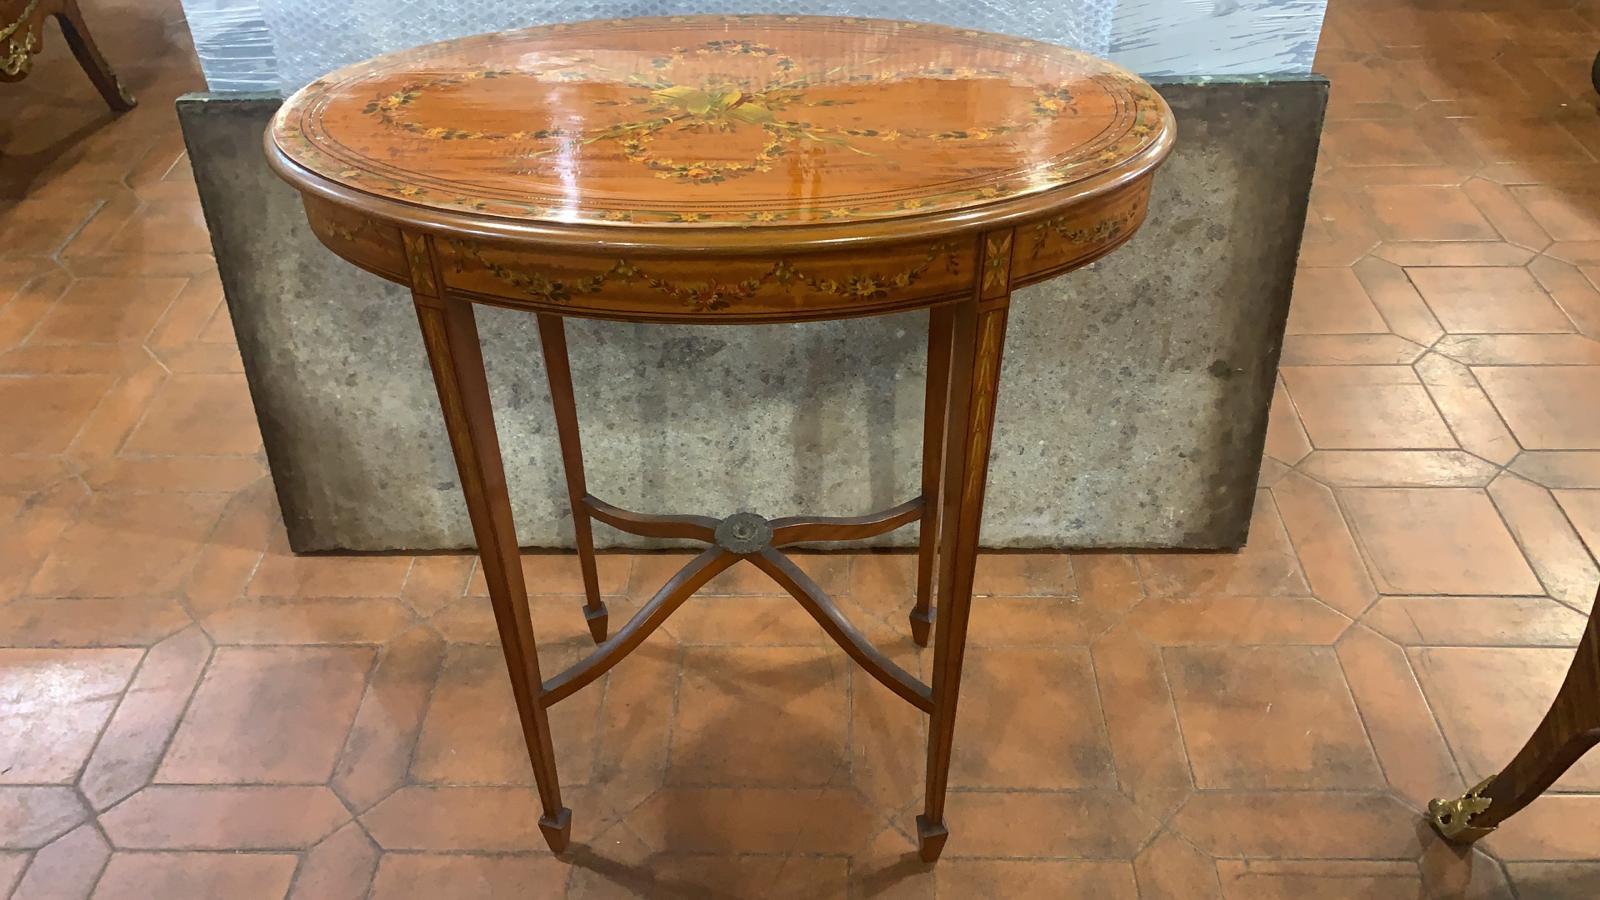 Elegant Satinwood oval tray table, painted with floral scenes and musical triumph, top with oval glass tray, four pyramidal legs connected by crosspieces. England second half nineteenth century.